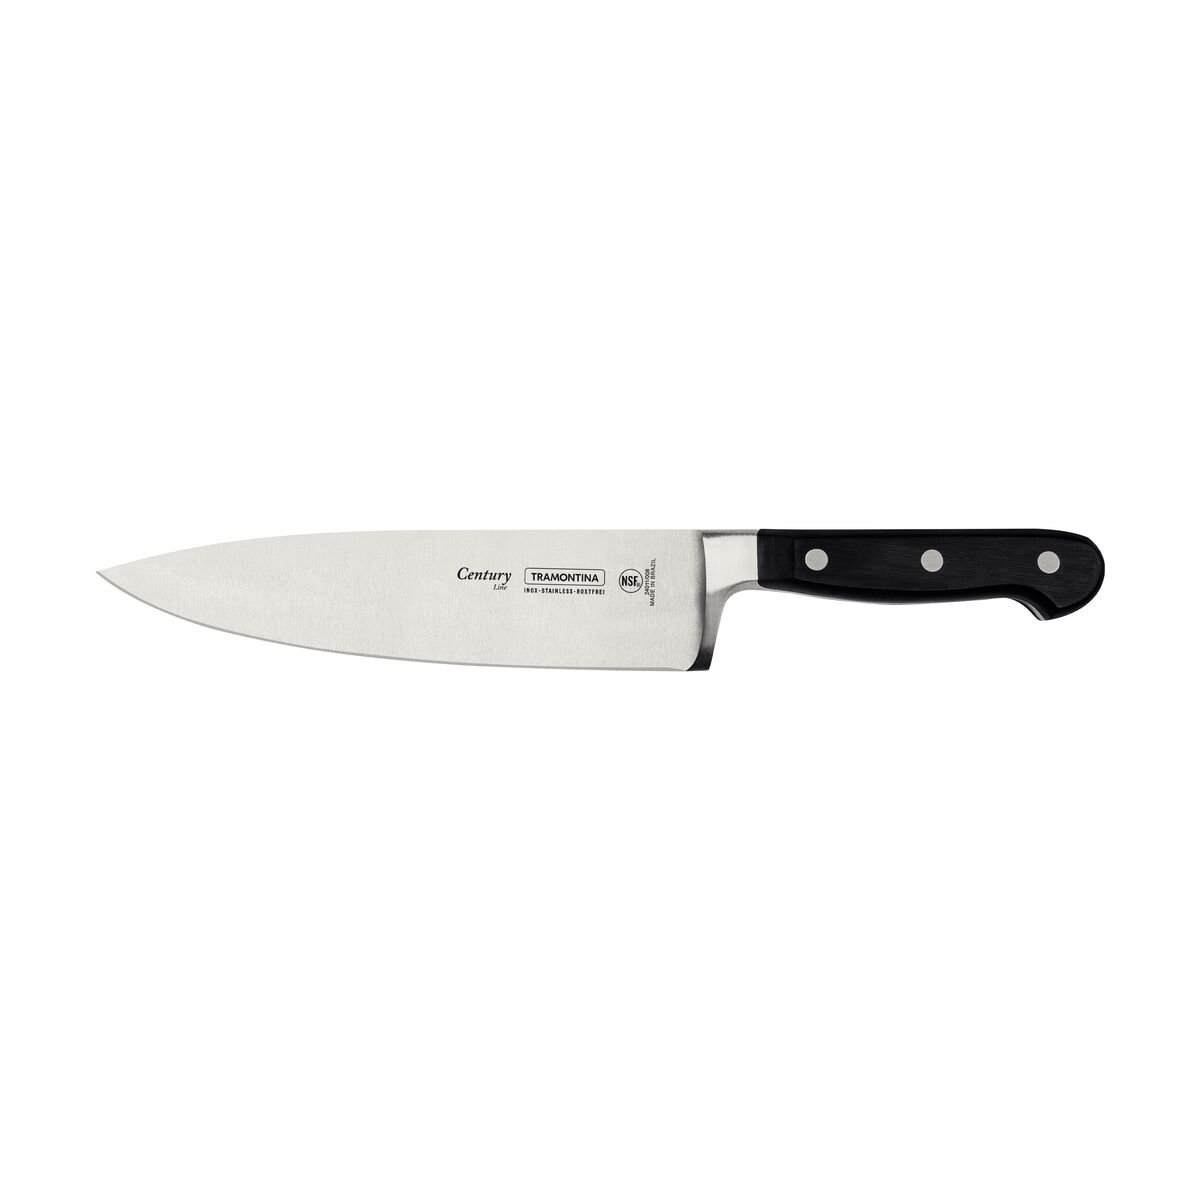 Tramontina Century 8" Chef's knife with Stainless-Steel Blade and Black Polycarbonate Handle